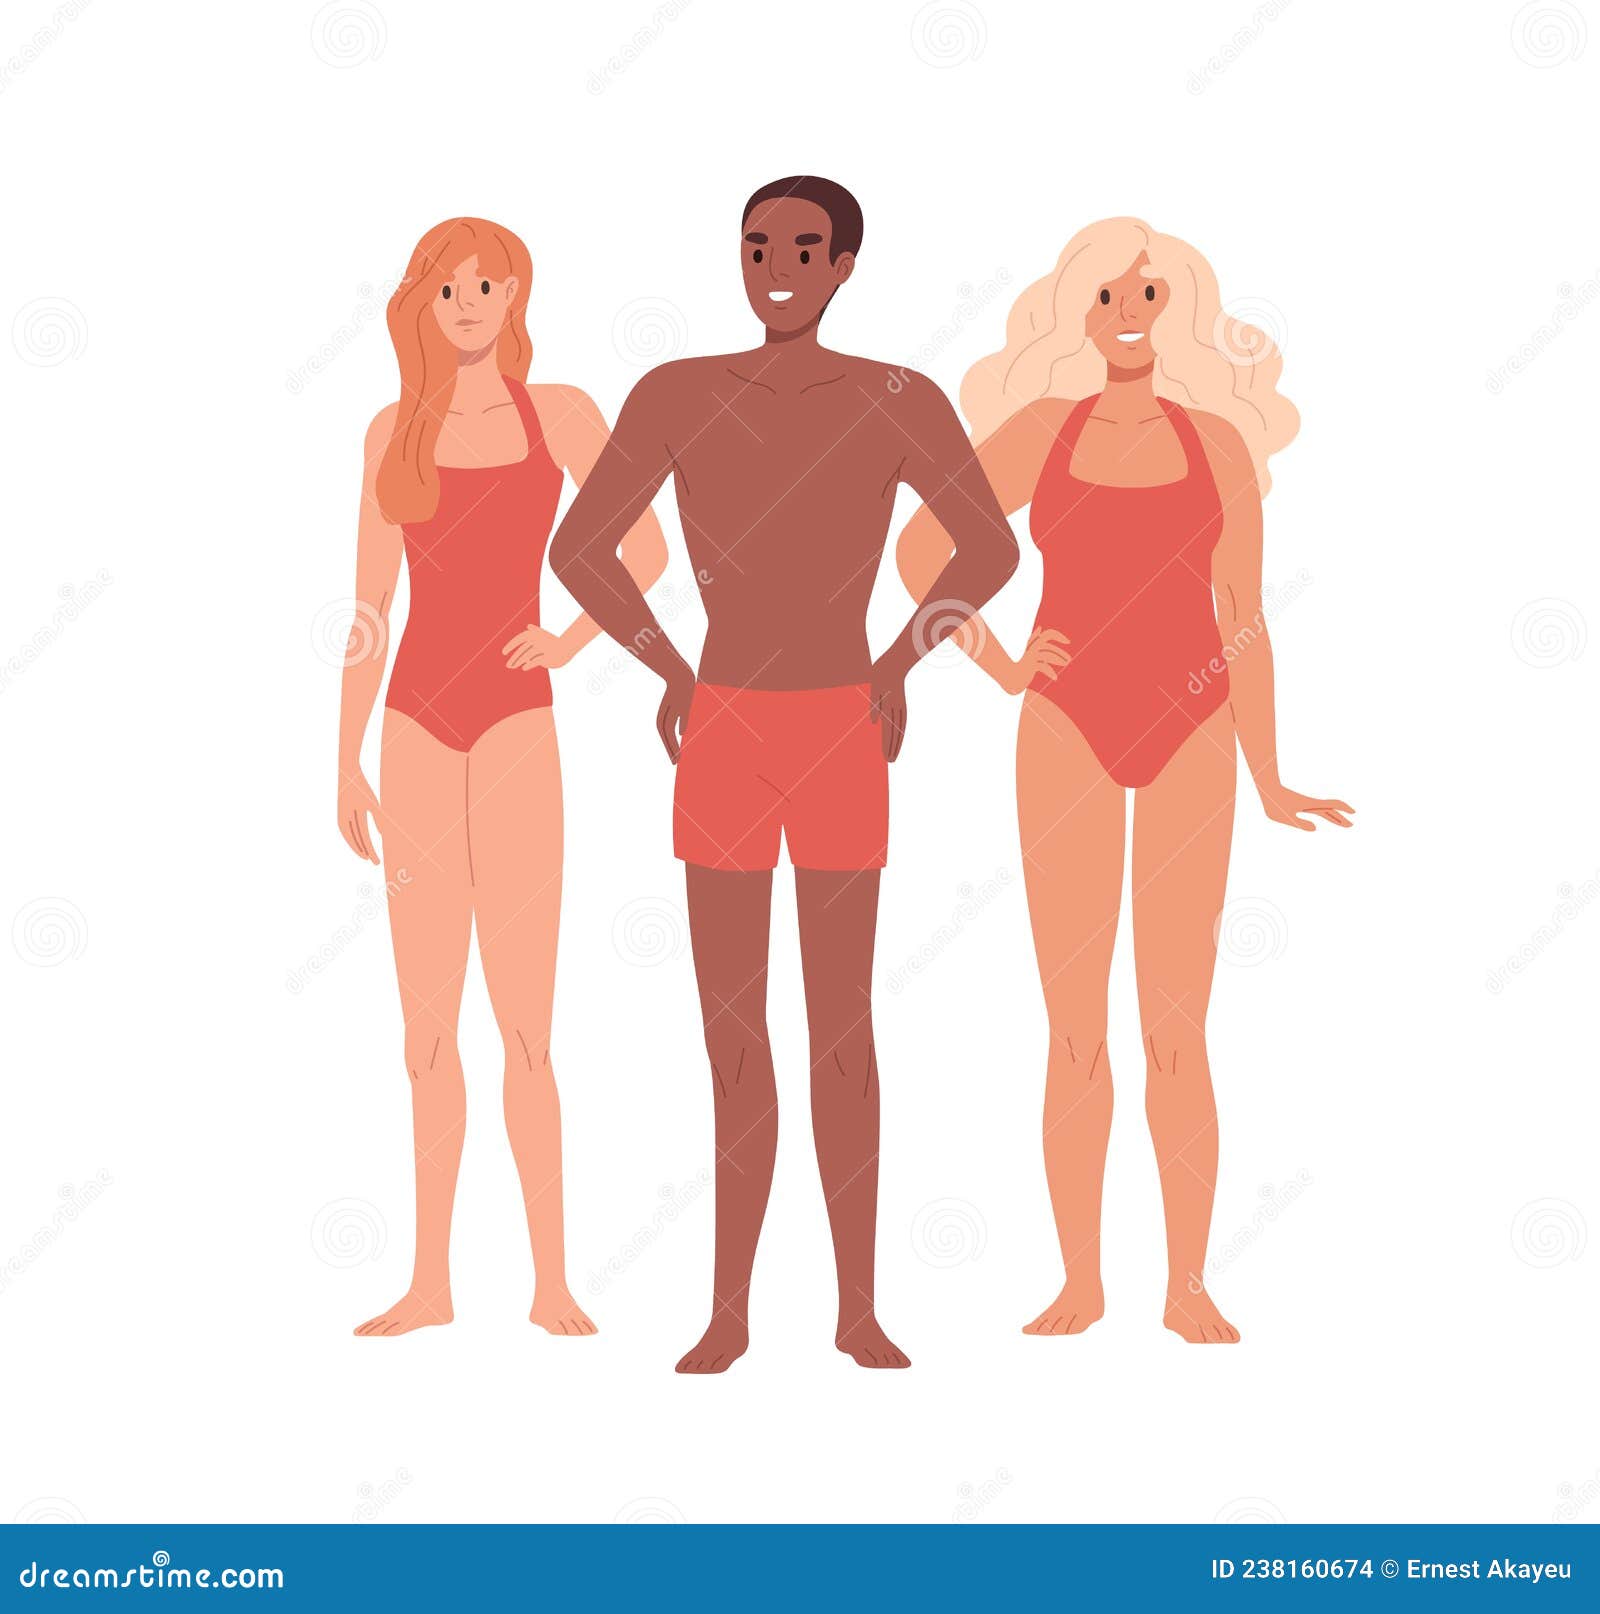 All Men Swimsuits and Swimwear Designs. Stock Vector - Illustration of  apparel, diver: 128245589